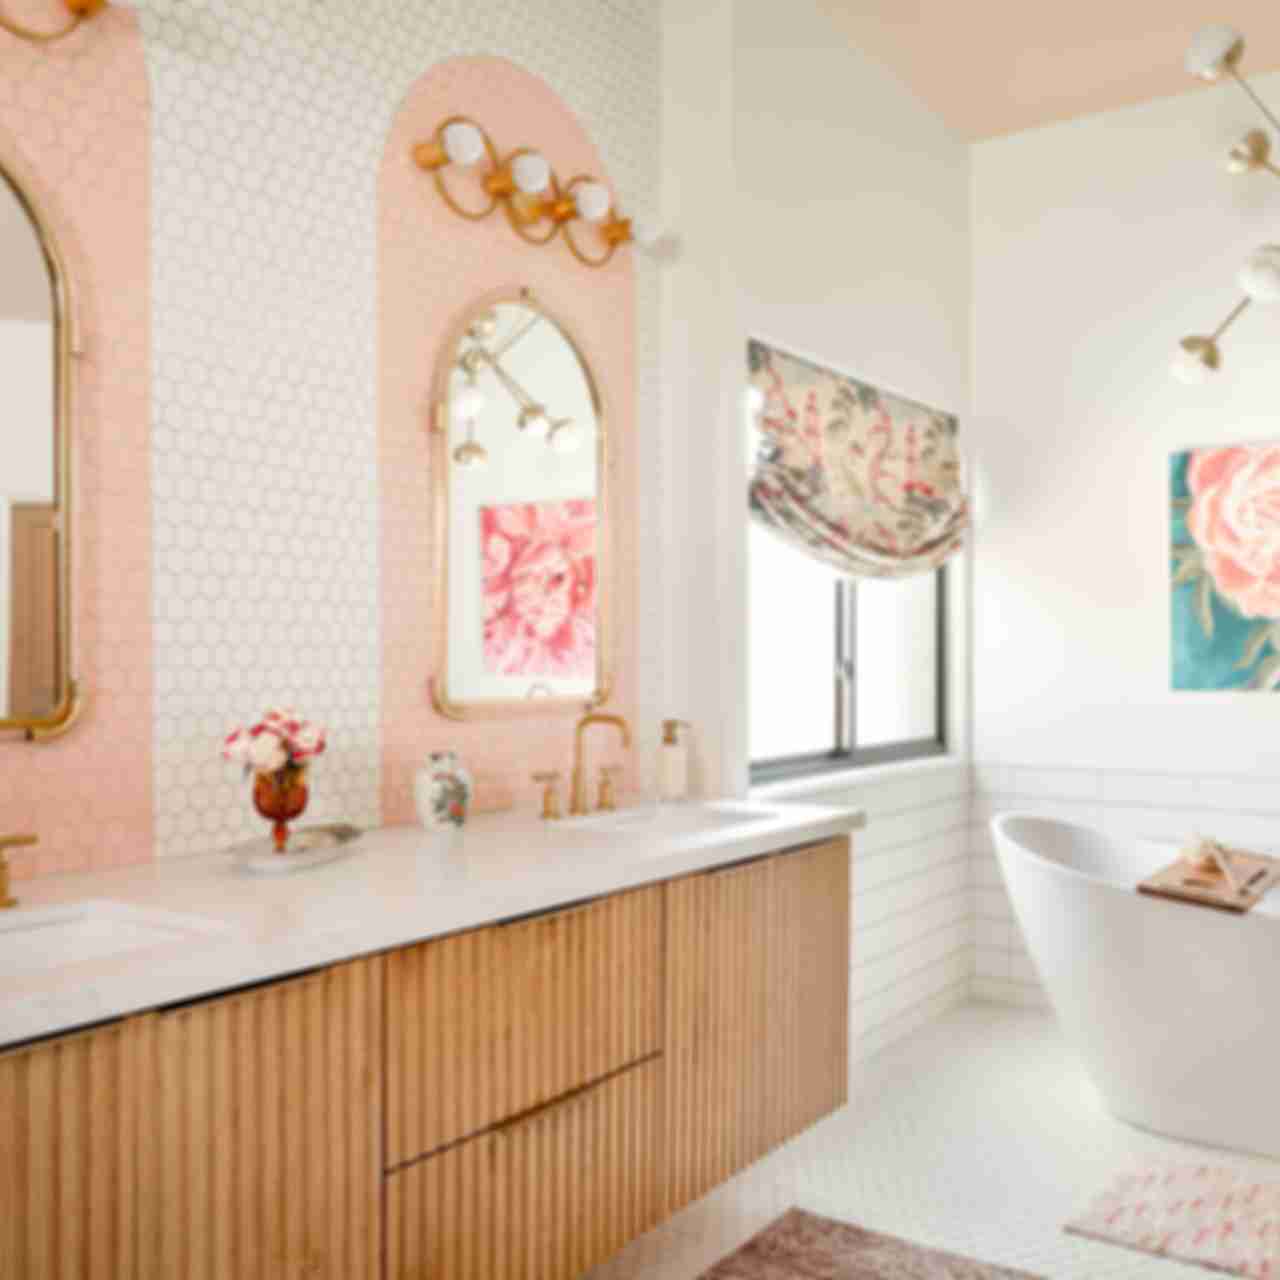 Bathroom with a white and pink tiled backsplash and white floor tile.